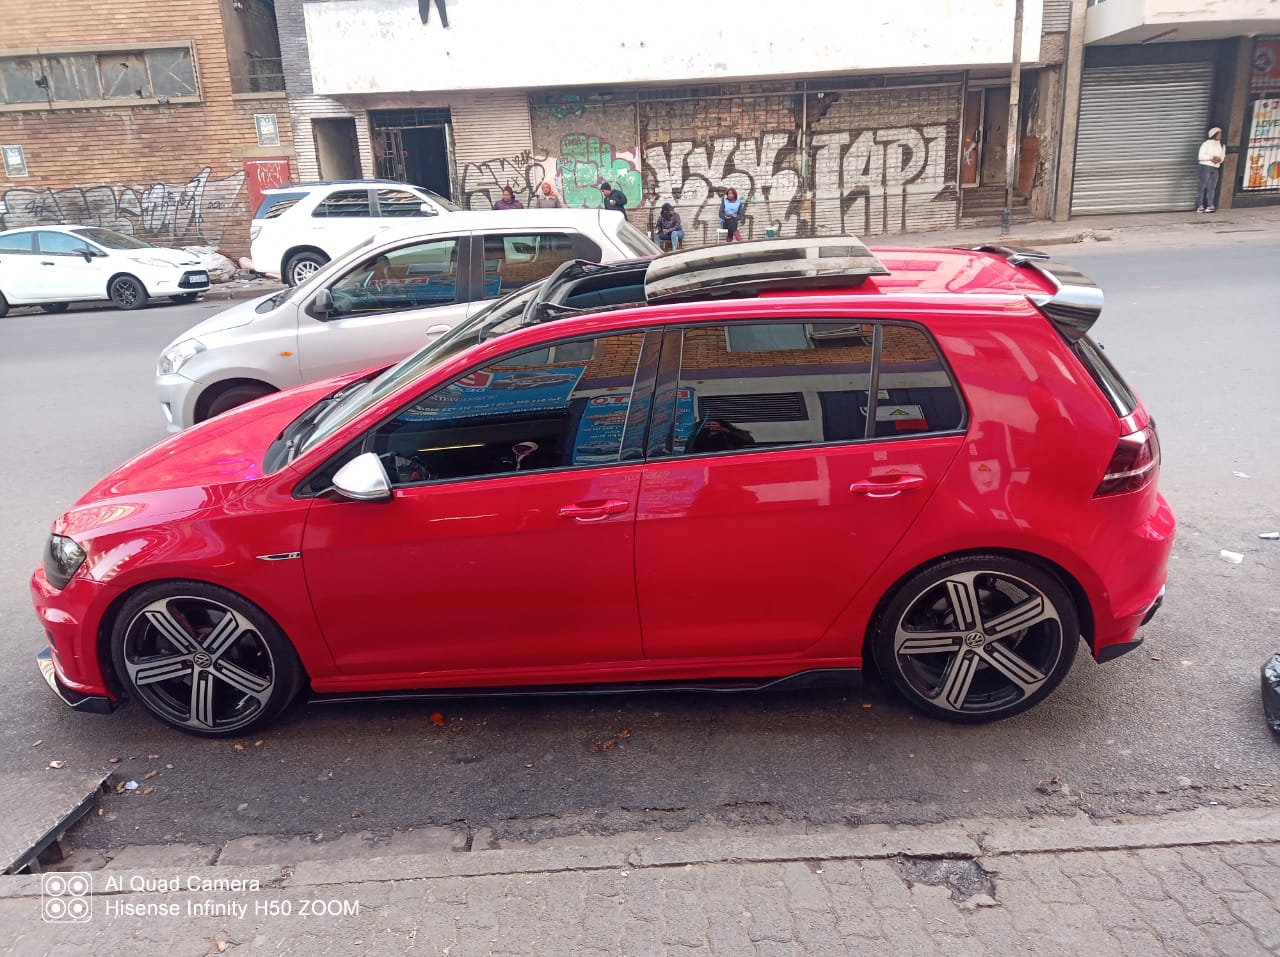 VW Golf 7R 2.0 Auto,2014,With Service Book